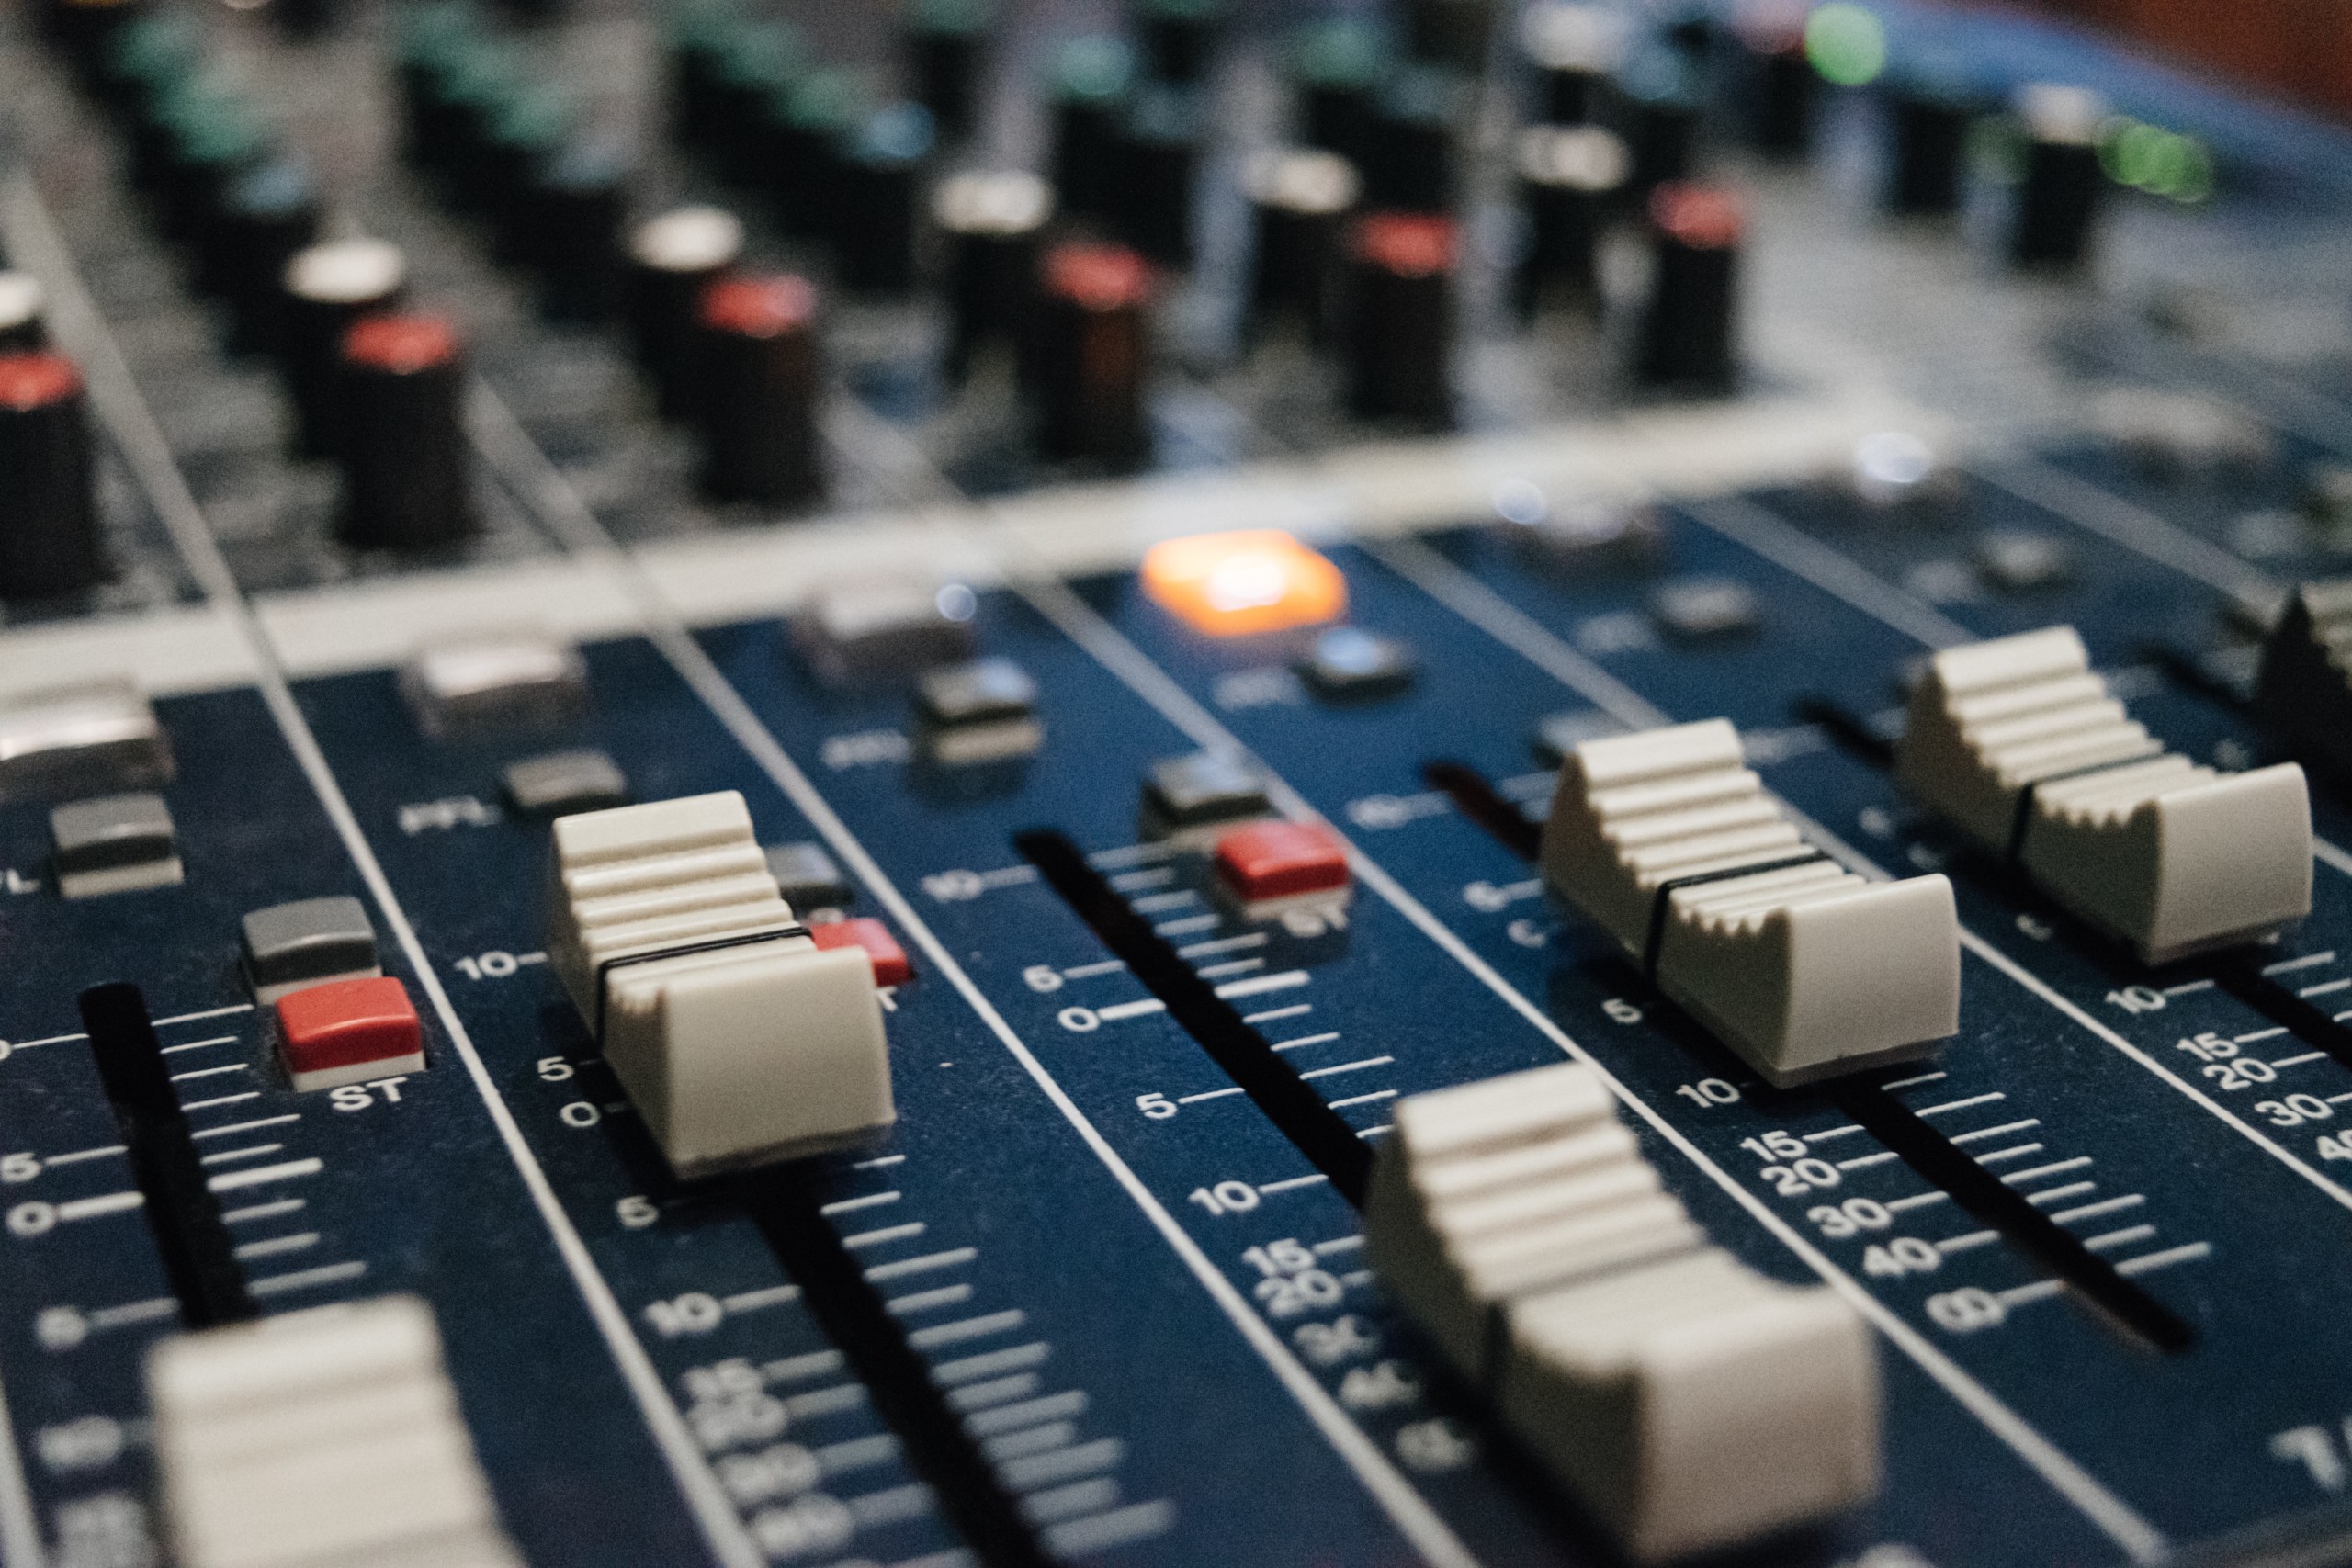 This is a photo of a sound board with various buttons used to equalize. Photo by Alexey Ruban.